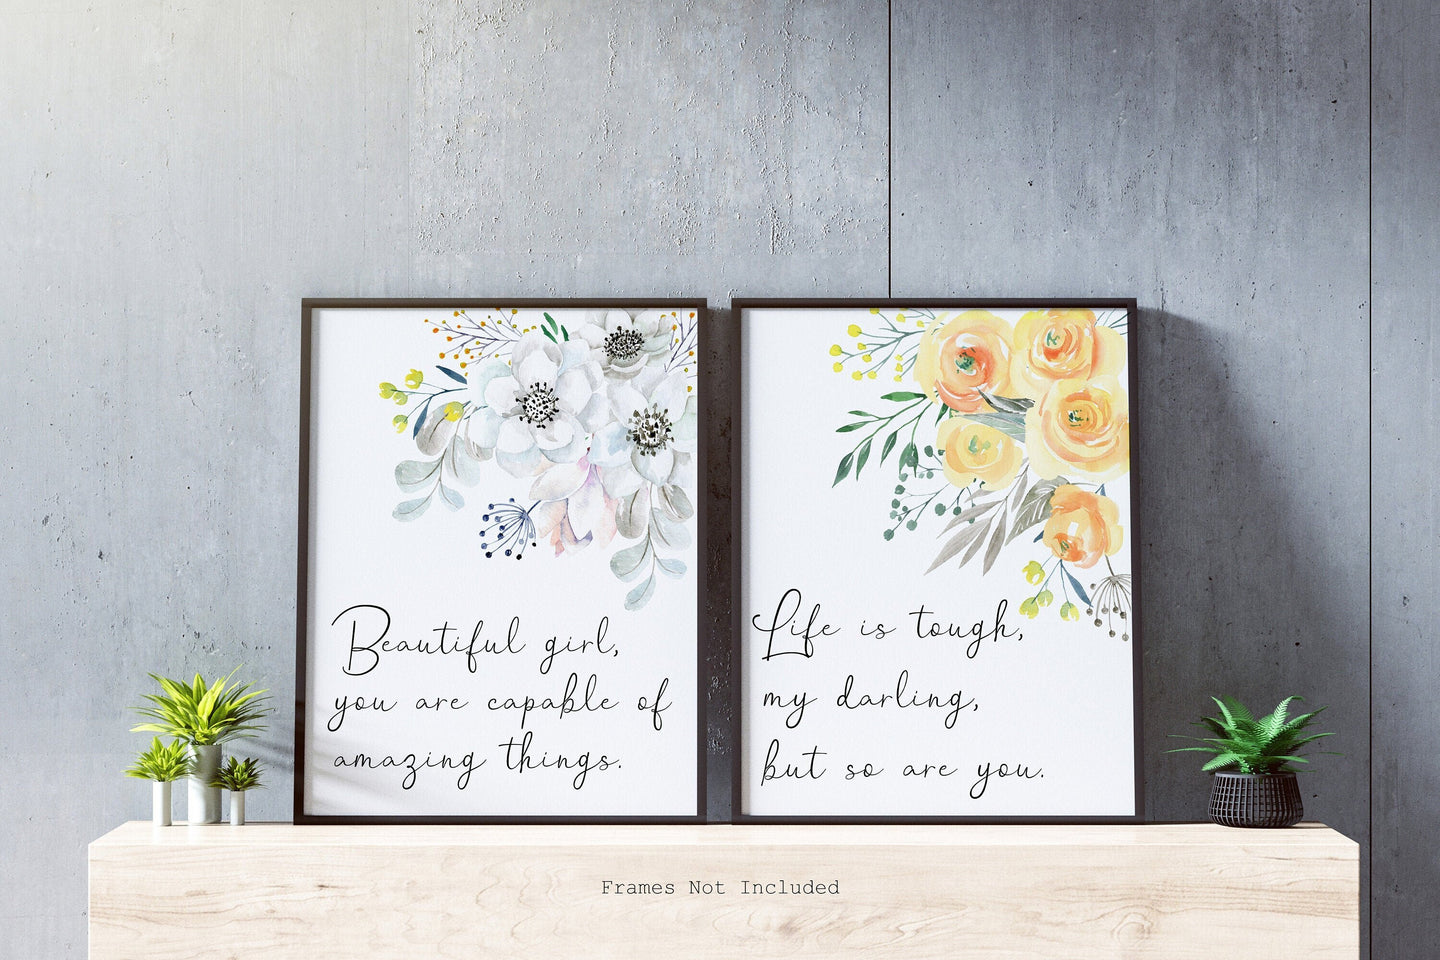 Set of 2 Prints - Life is tough but so are you & Beautiful girl UNFRAMED Inspirational nursery prints, Watercolor flowers print